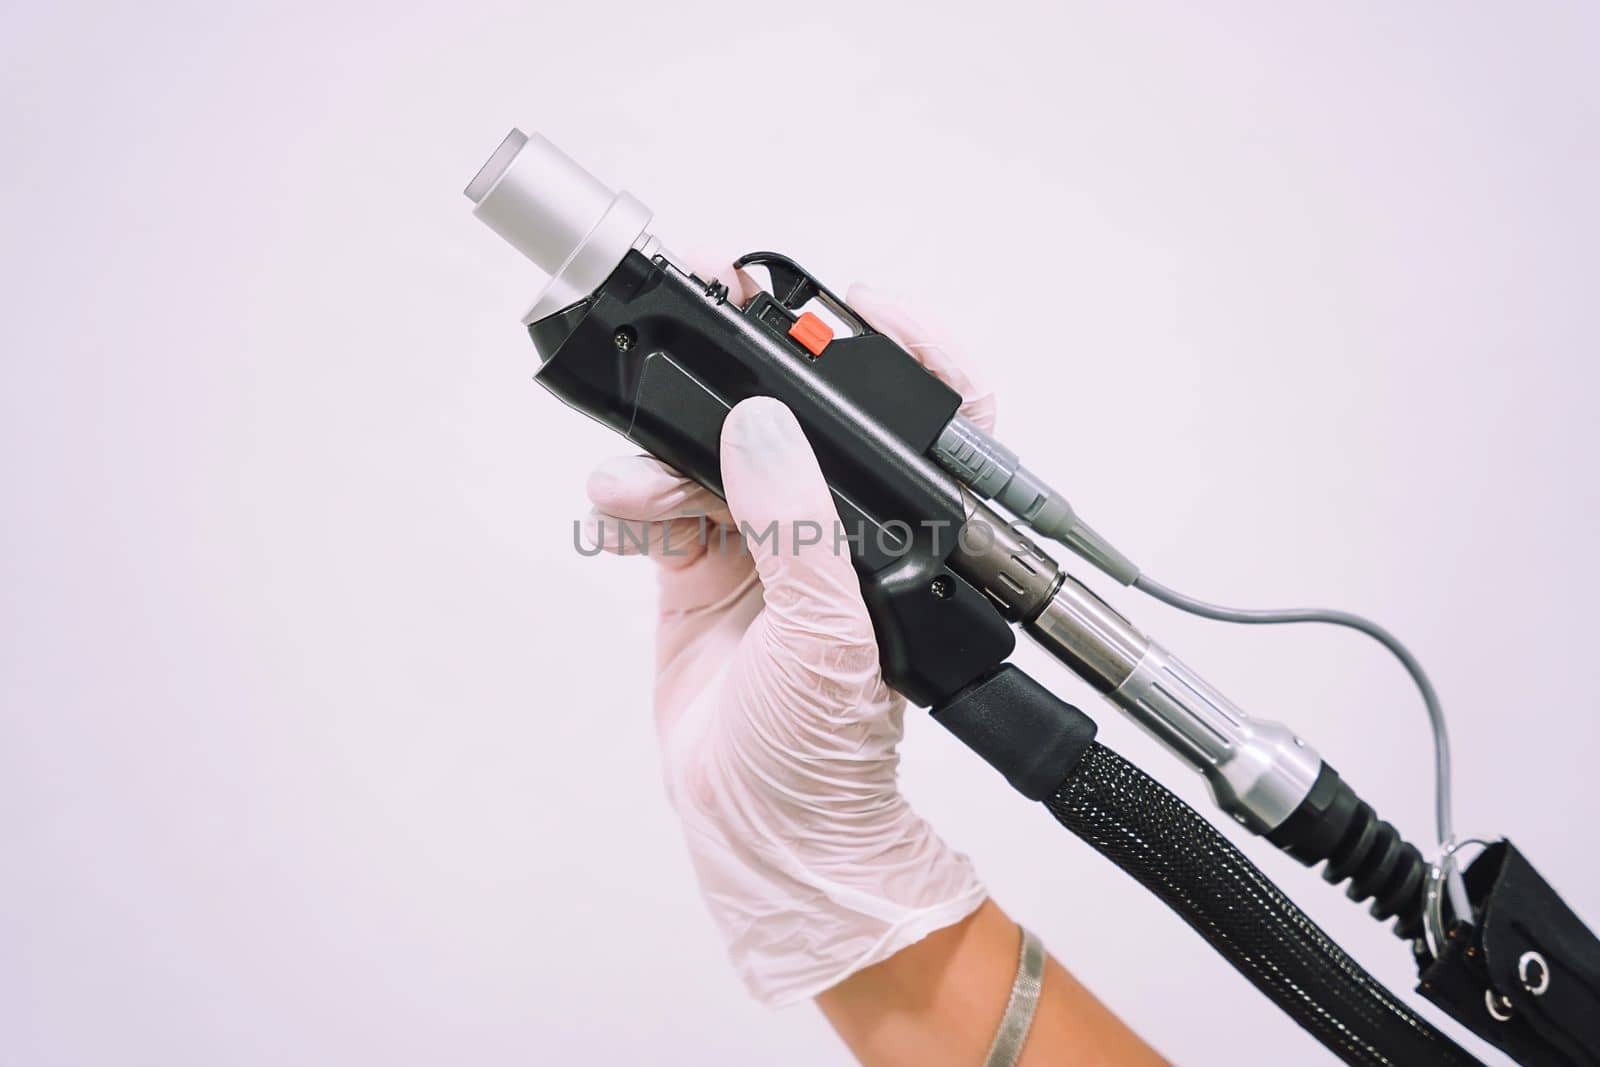 Close up shot of gloved hand with the laser hair removal machine's handpiece. Alexandrite laser techhnology removing hair. Beauty technology concept